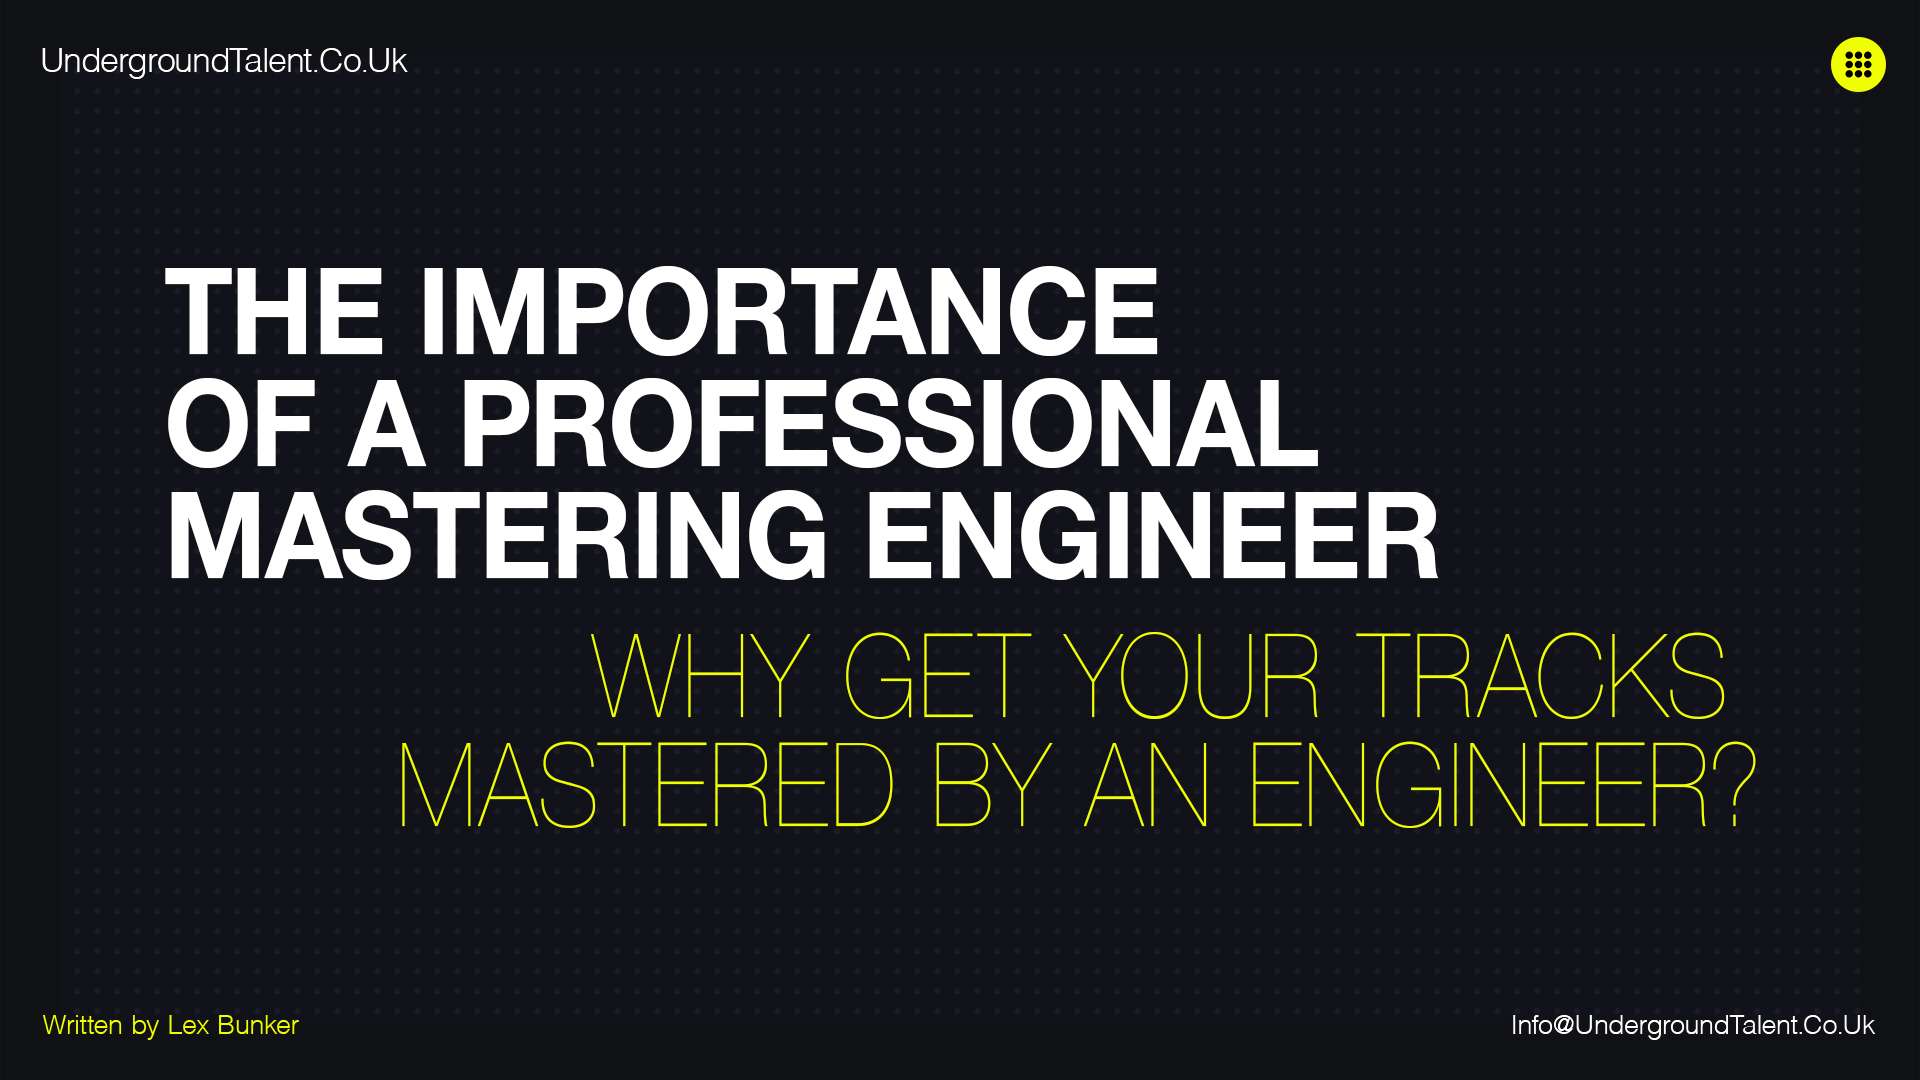 The Importance of a Professional Mastering Engineer